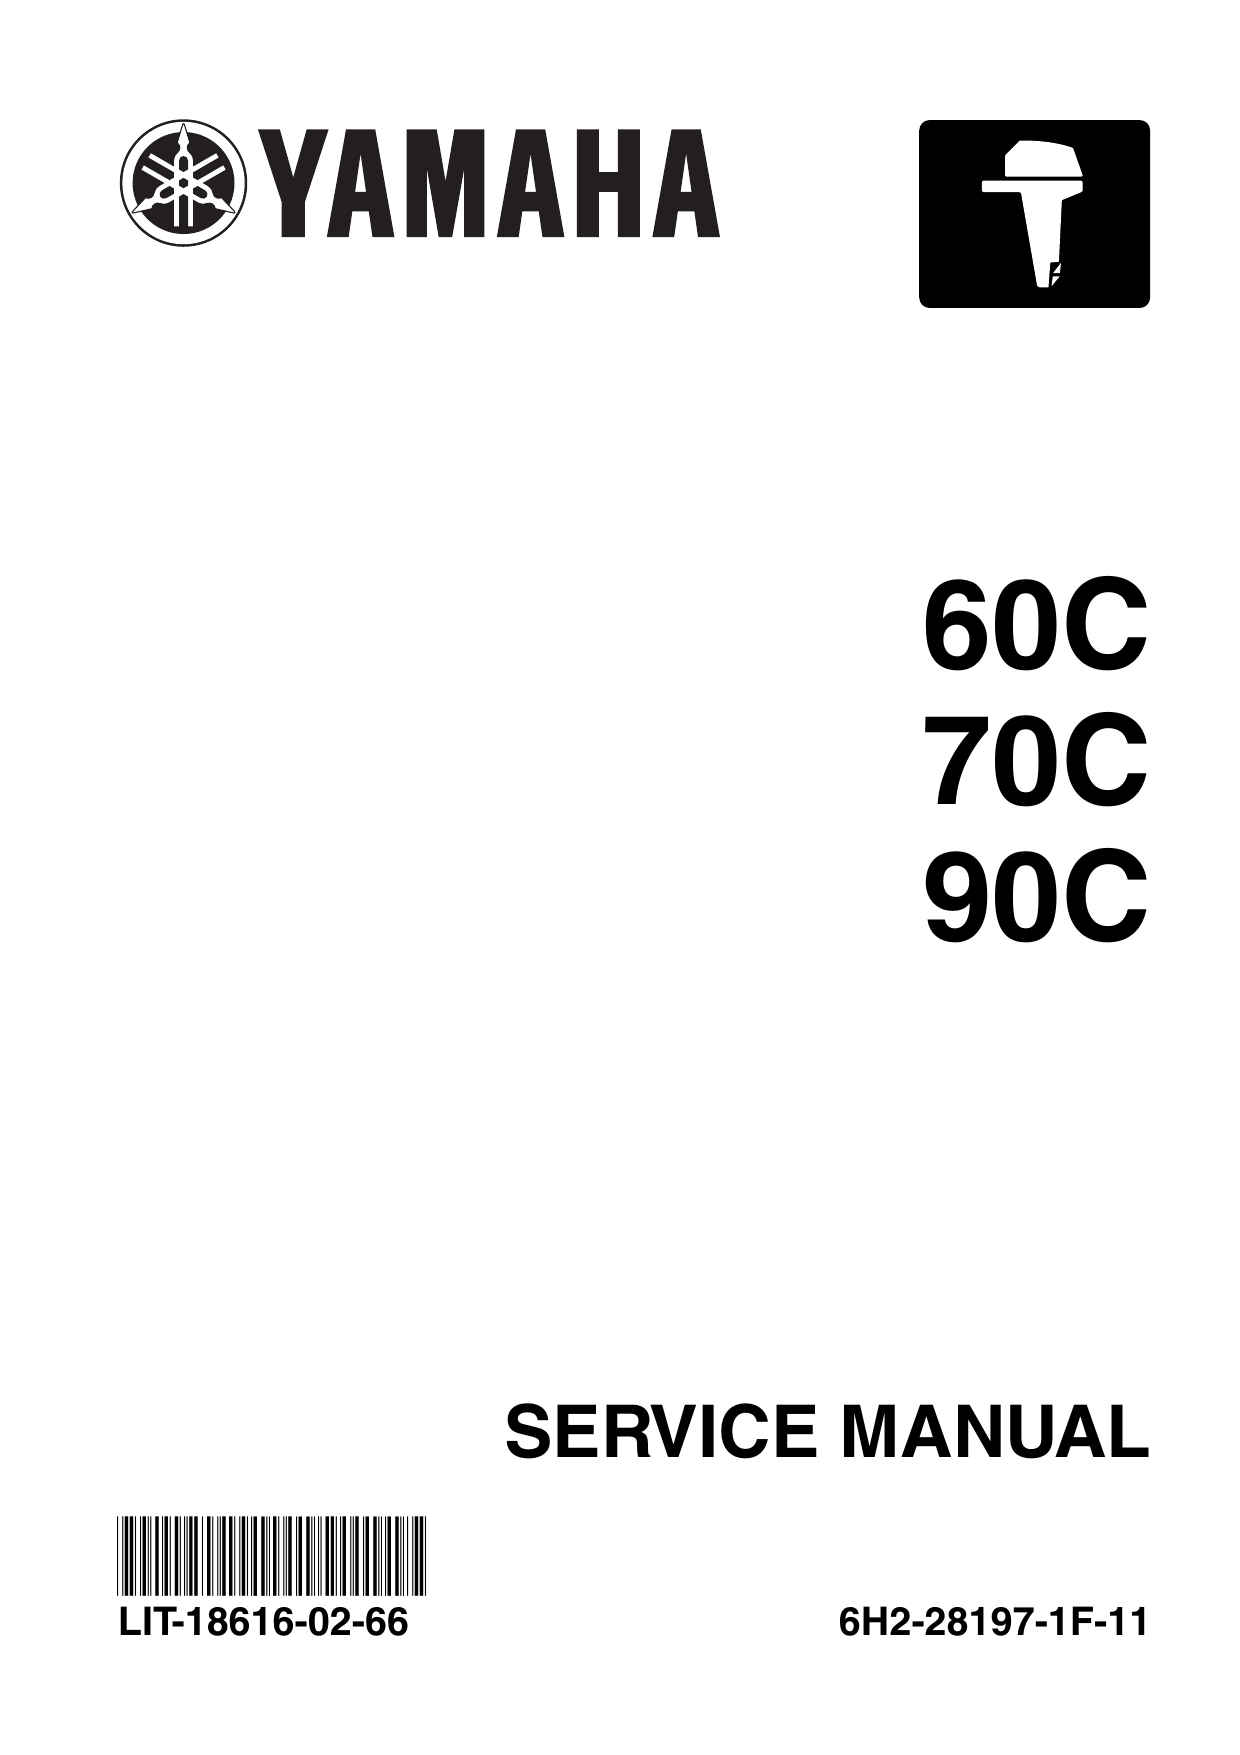 2005 Yamaha 60C, 70C, 90C outboard engine service manual Preview image 1